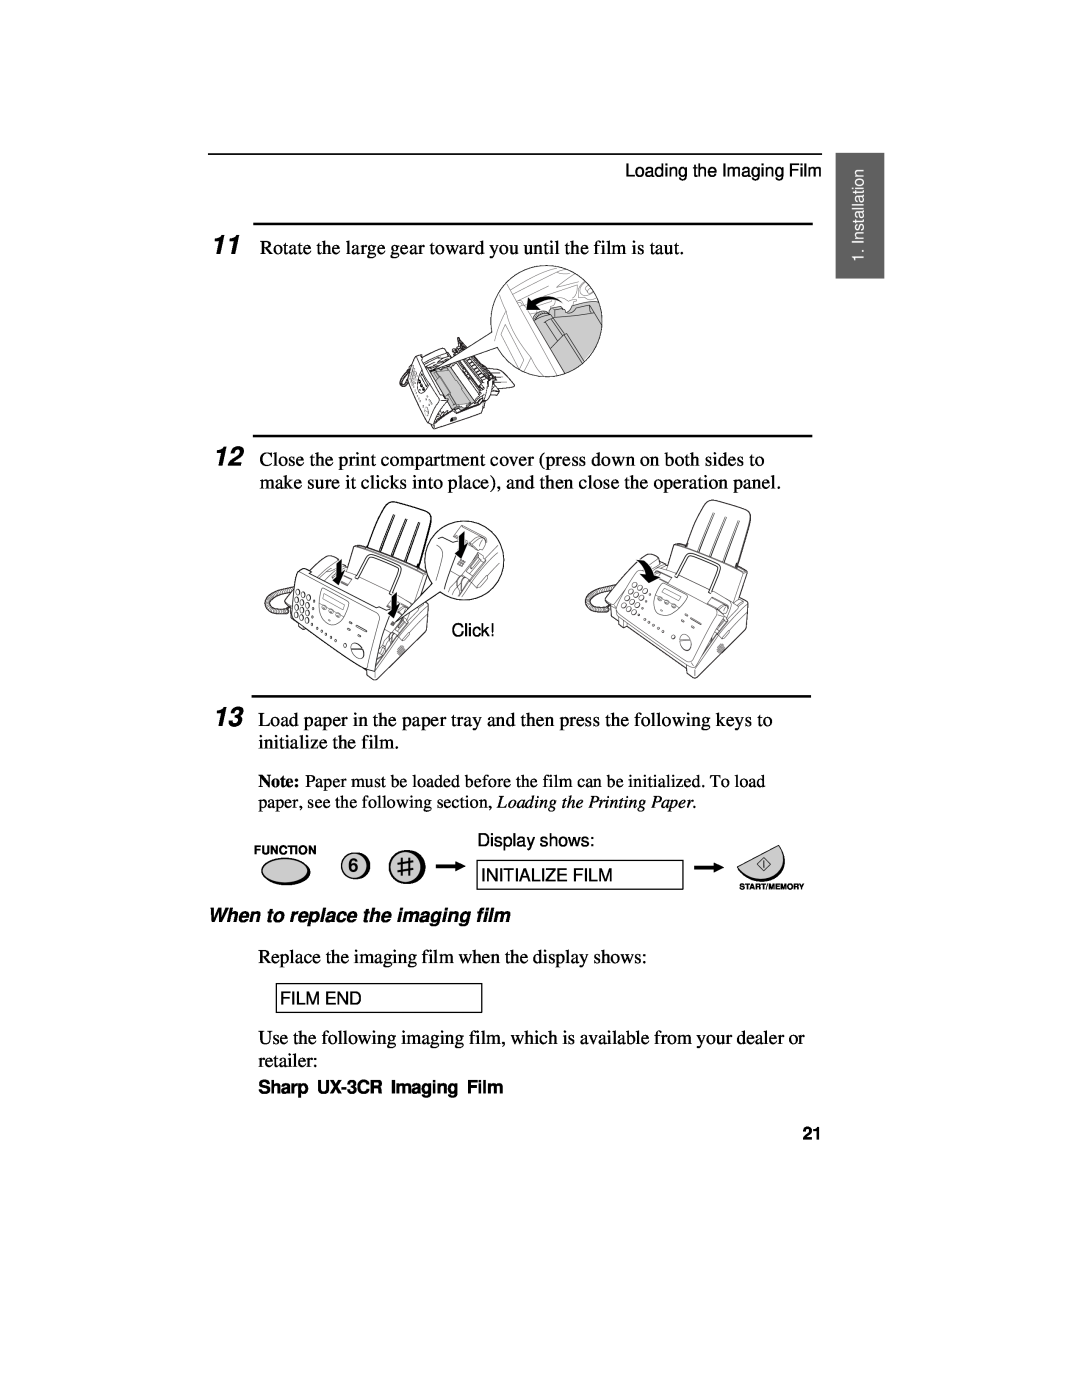 Sharp UX-460 operation manual When to replace the imaging film 